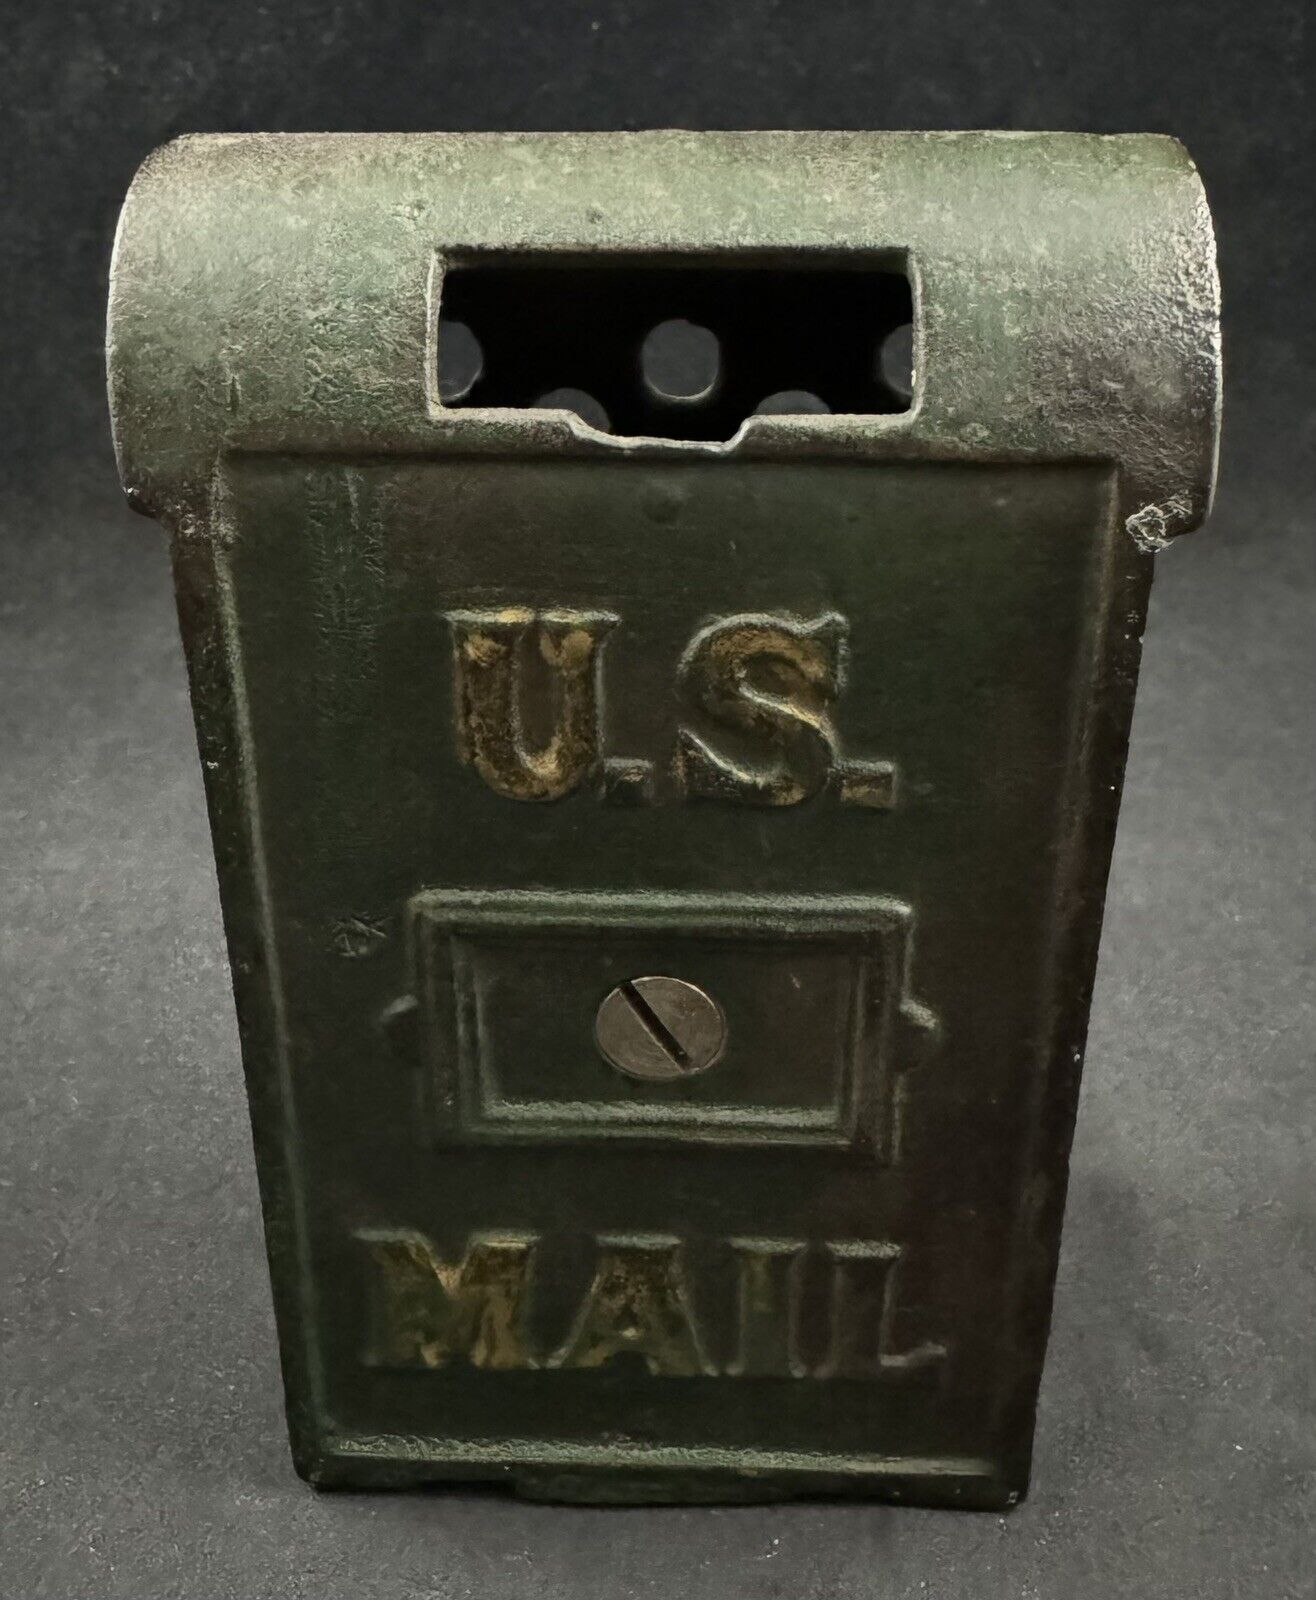 Vintage U.S. Mail Cast Iron Metal Still Coin Mailbox Bank - Made in USA